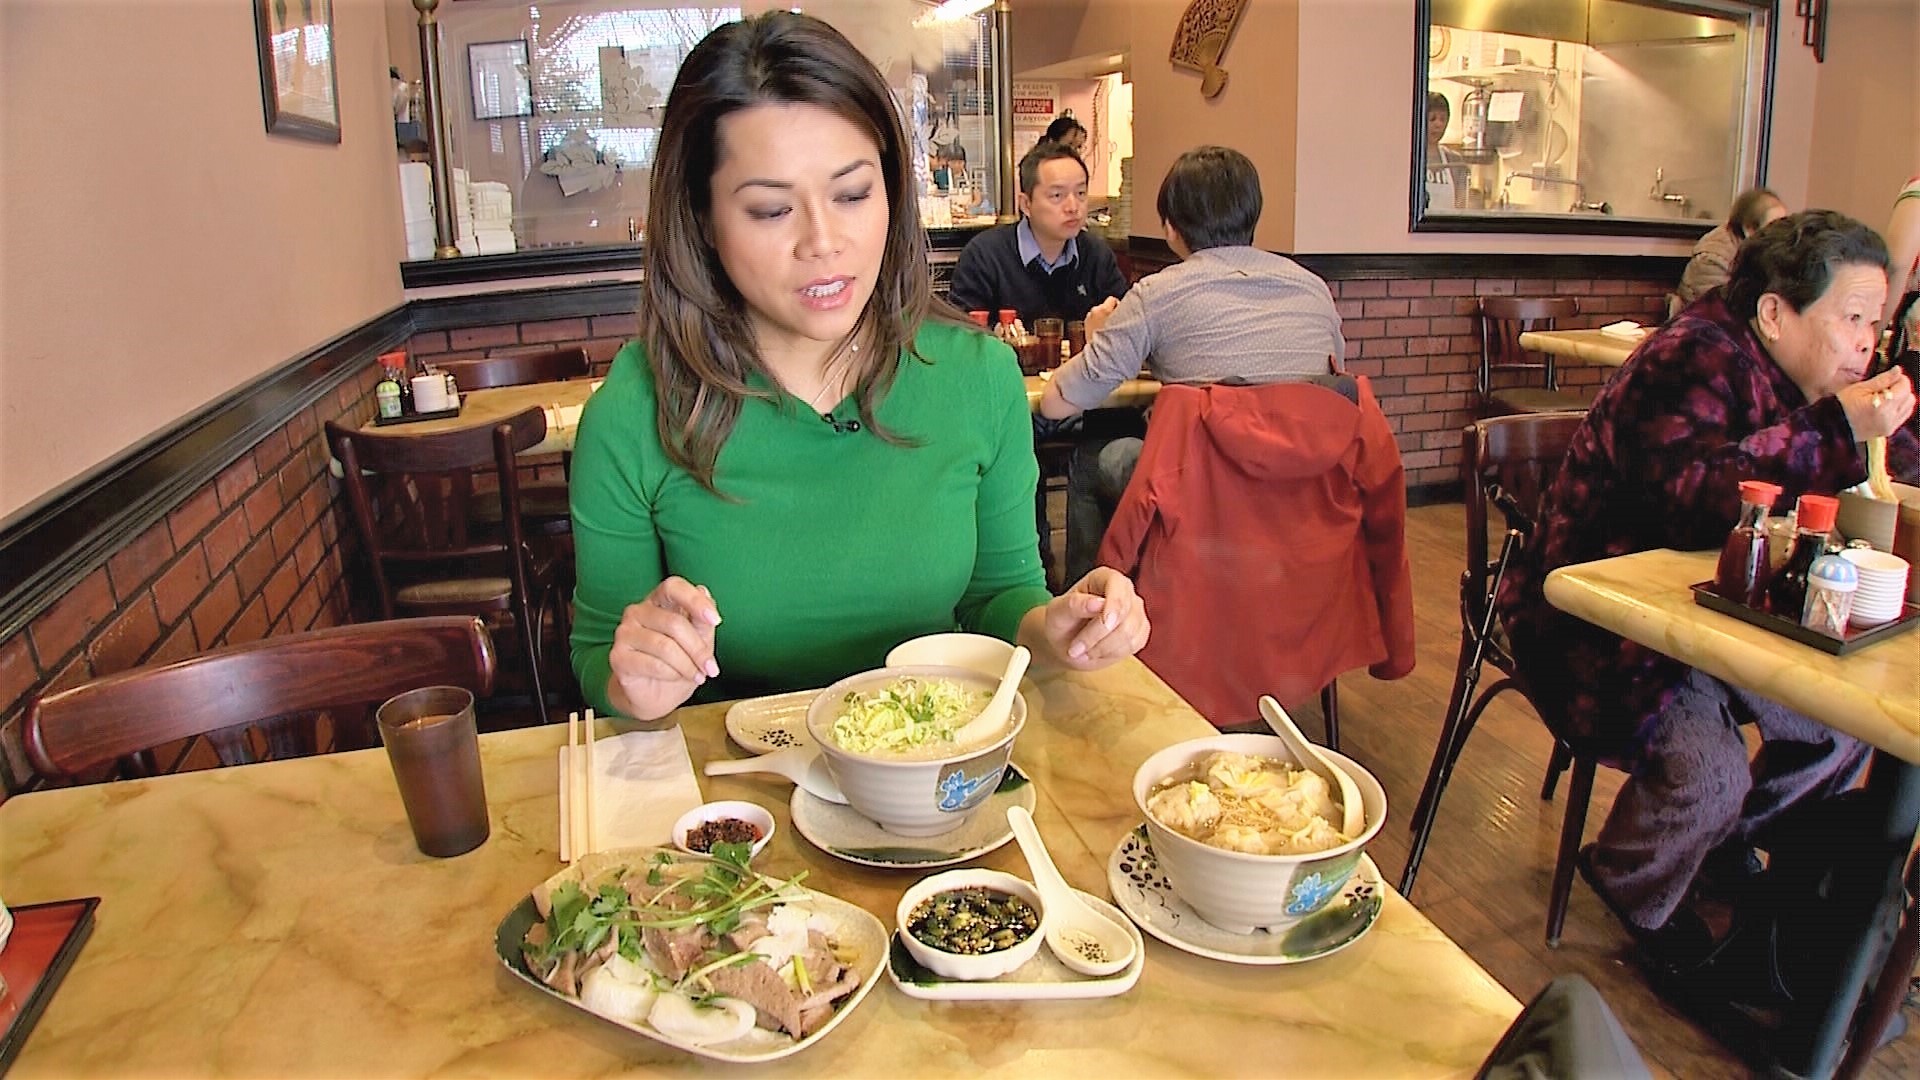 Taylor Hoang's recommendations for family-friendly restaurants include Pakistani, Chinese, and Vietnamese cuisine.